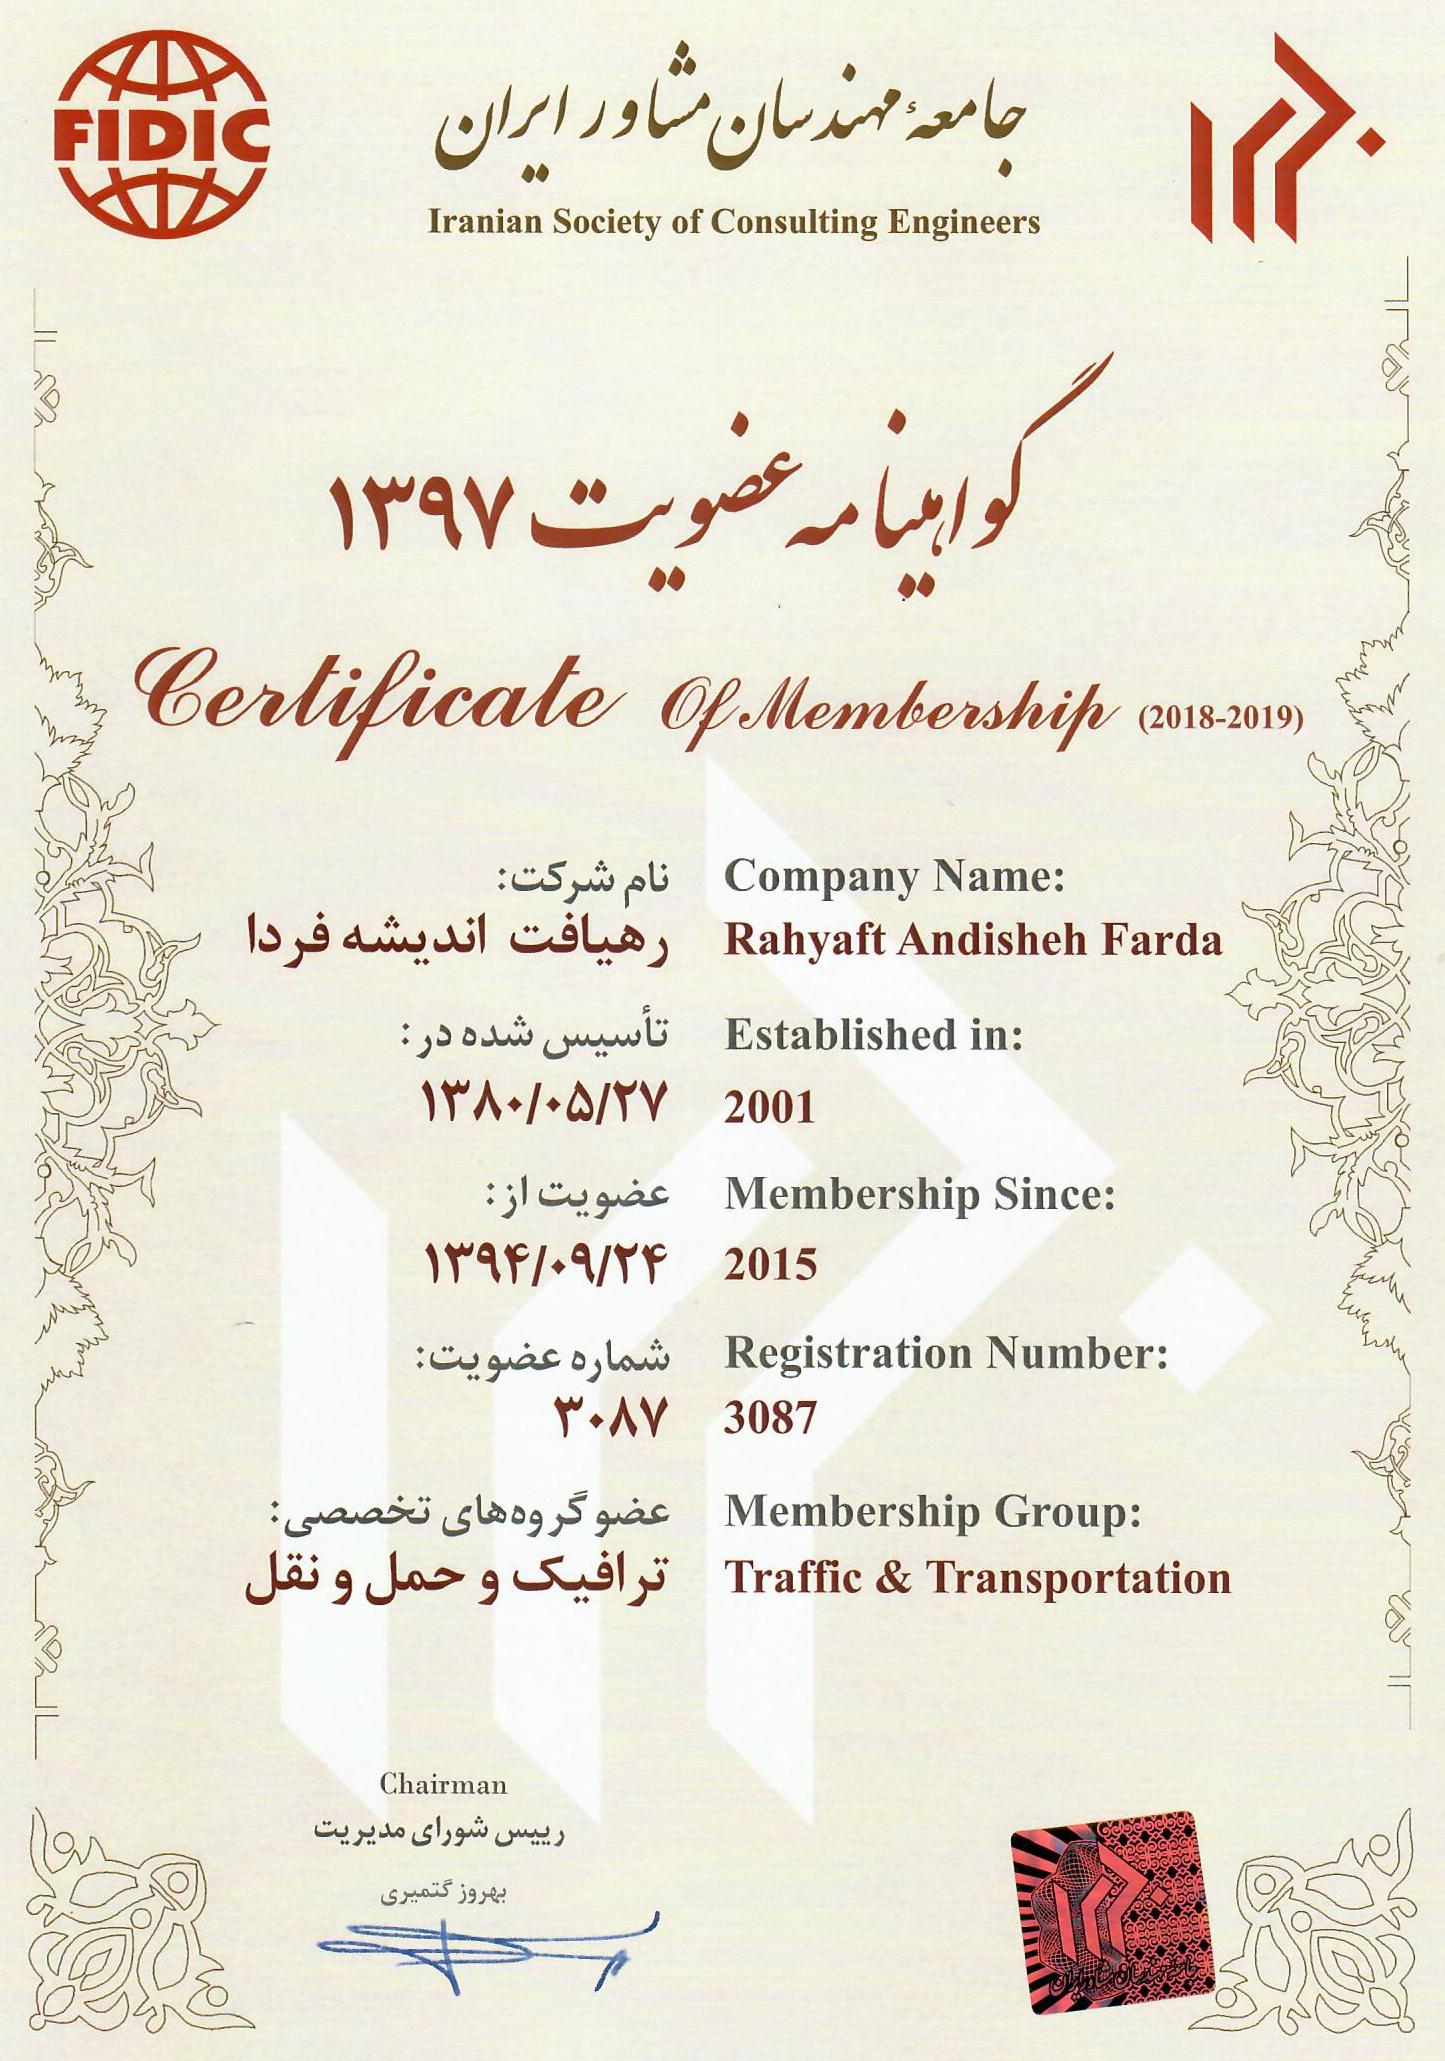 Member of Iranian Society consulting Engineers